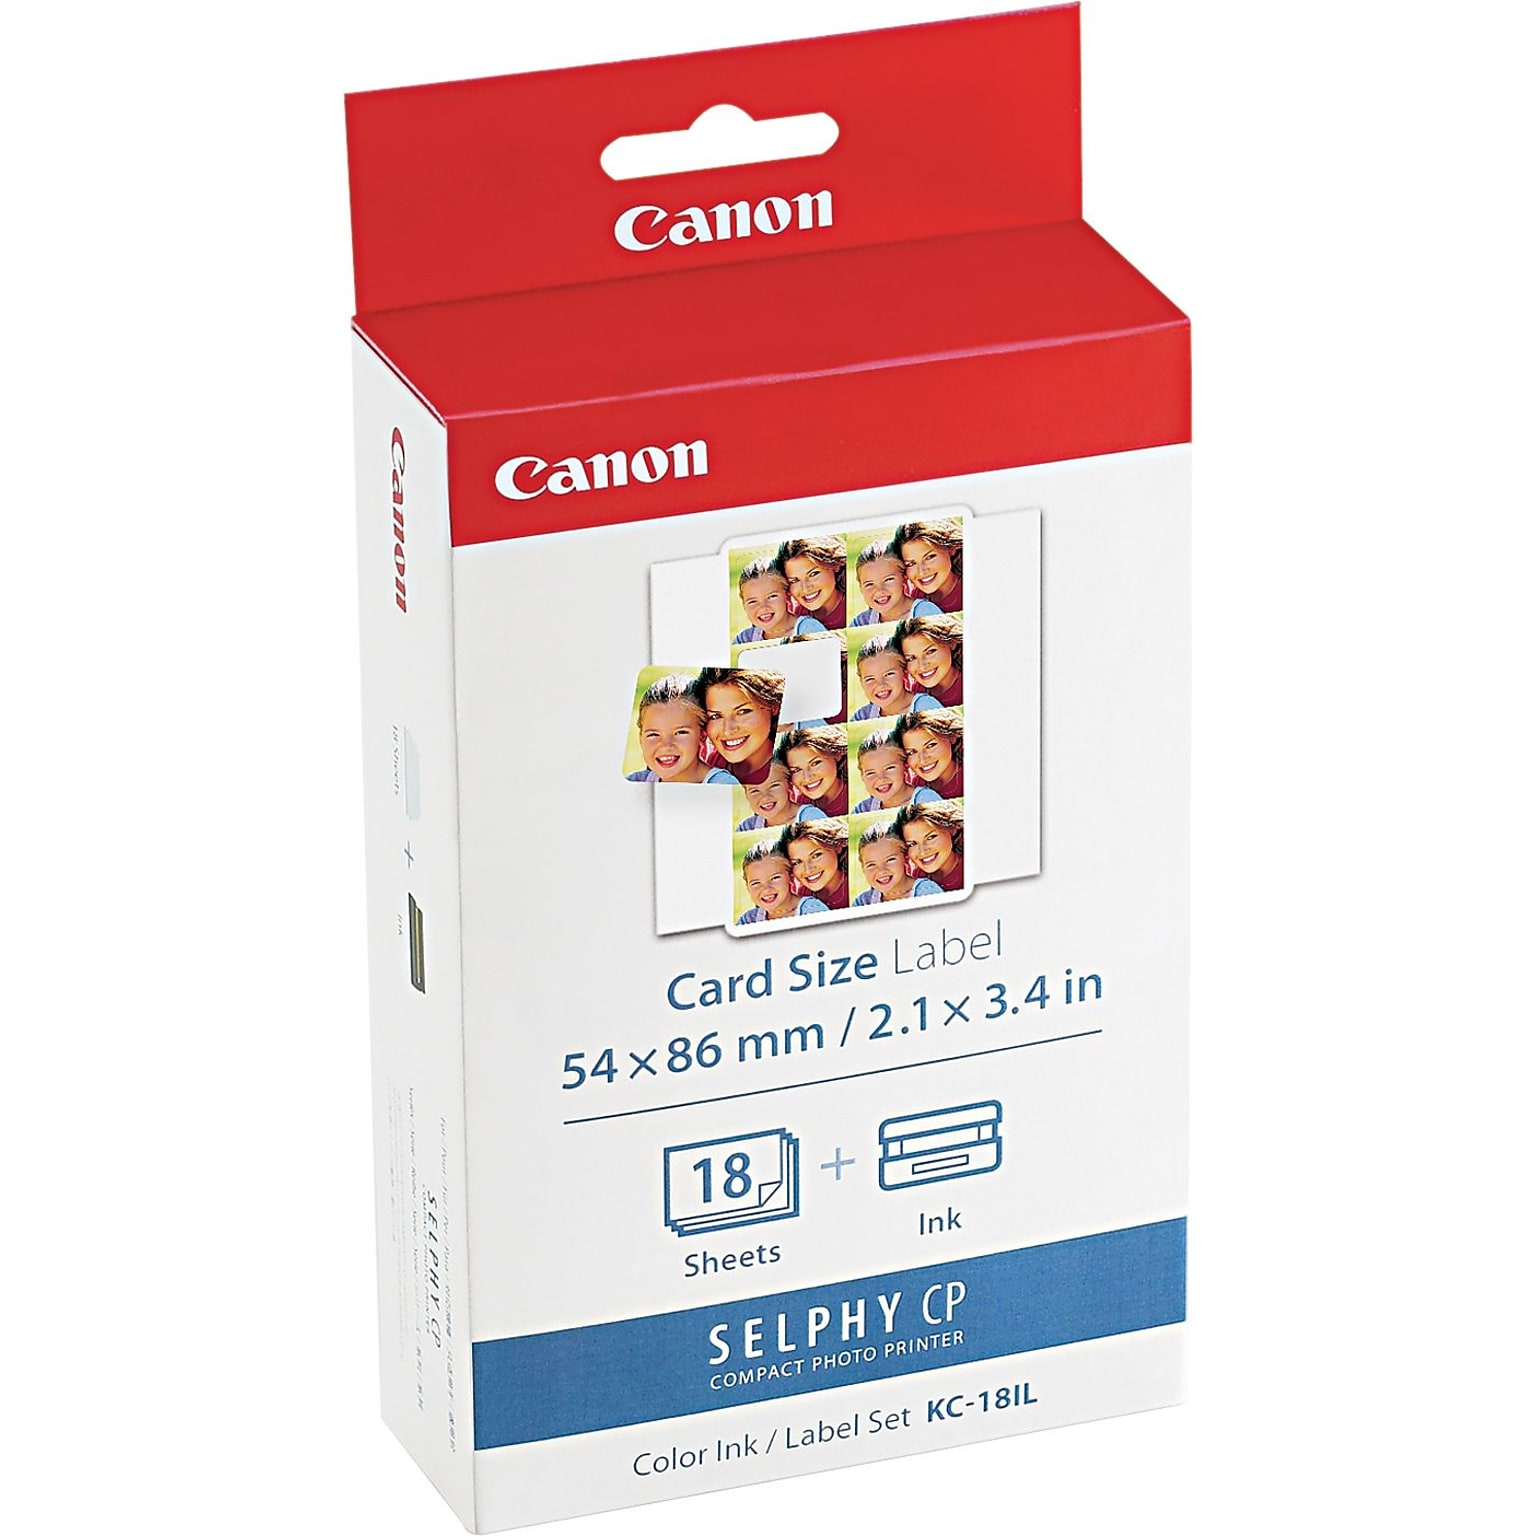 Canon (7740A001) Black/Color Ink Cartridge and Label Set